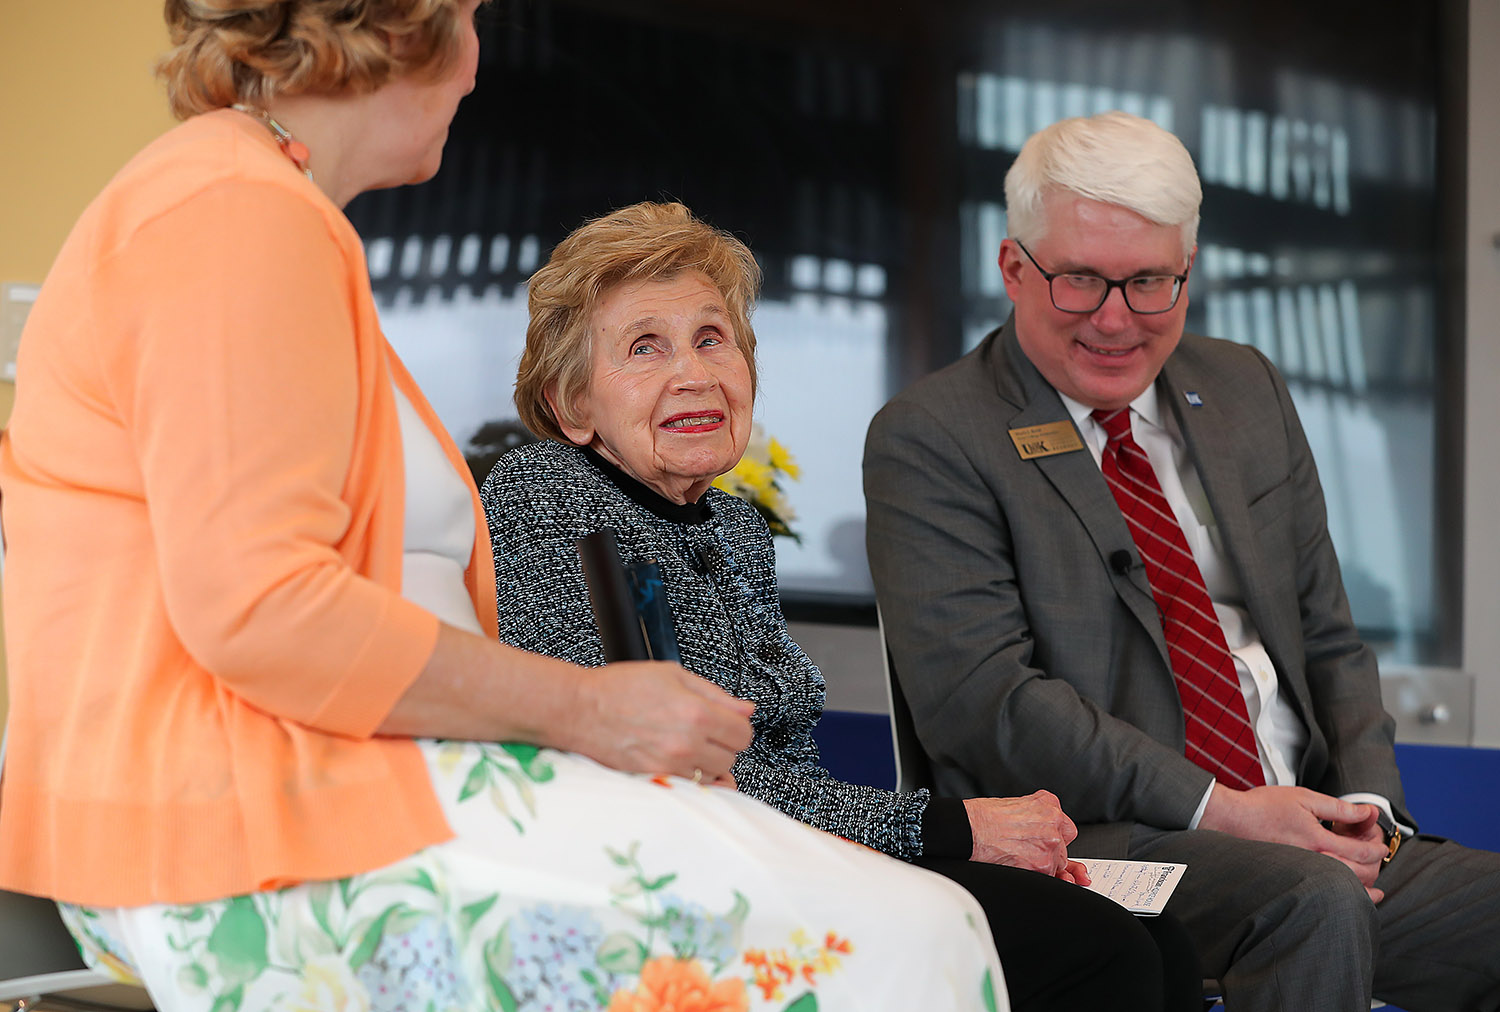 LaVonne Kopecky Plambeck, center, is pictured with fellow Early Childhood Pioneer Award recipient Roxanne Vipond and UNK College of Education Dean Mark Reid during Thursday evening's ceremony at the Plambeck Early Childhood Education Center.